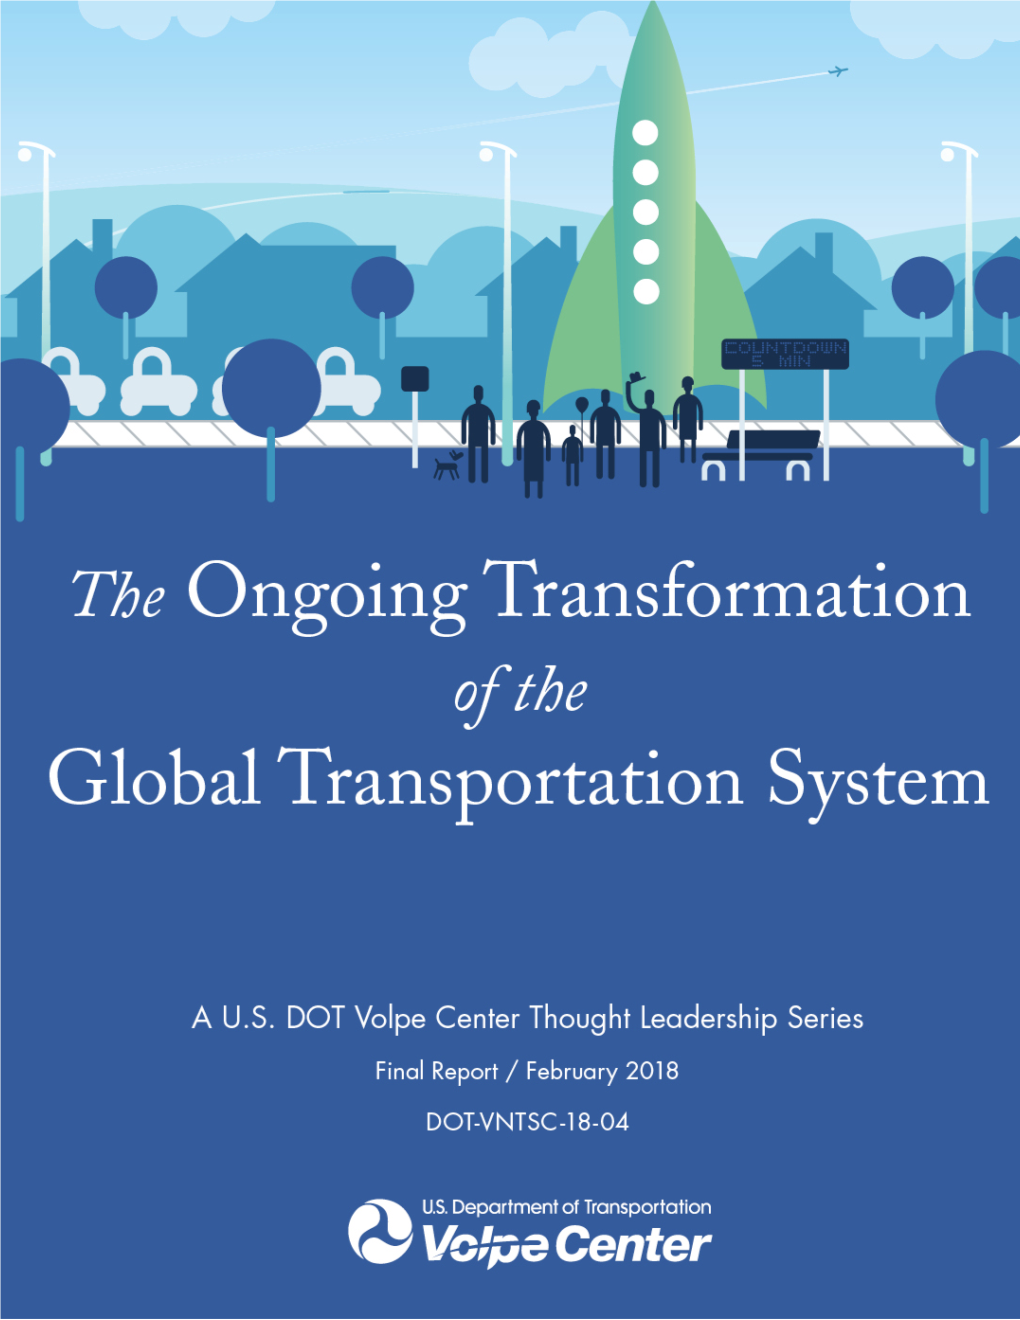 The Ongoing Transformation of the Global Transportation System: Series Introduction